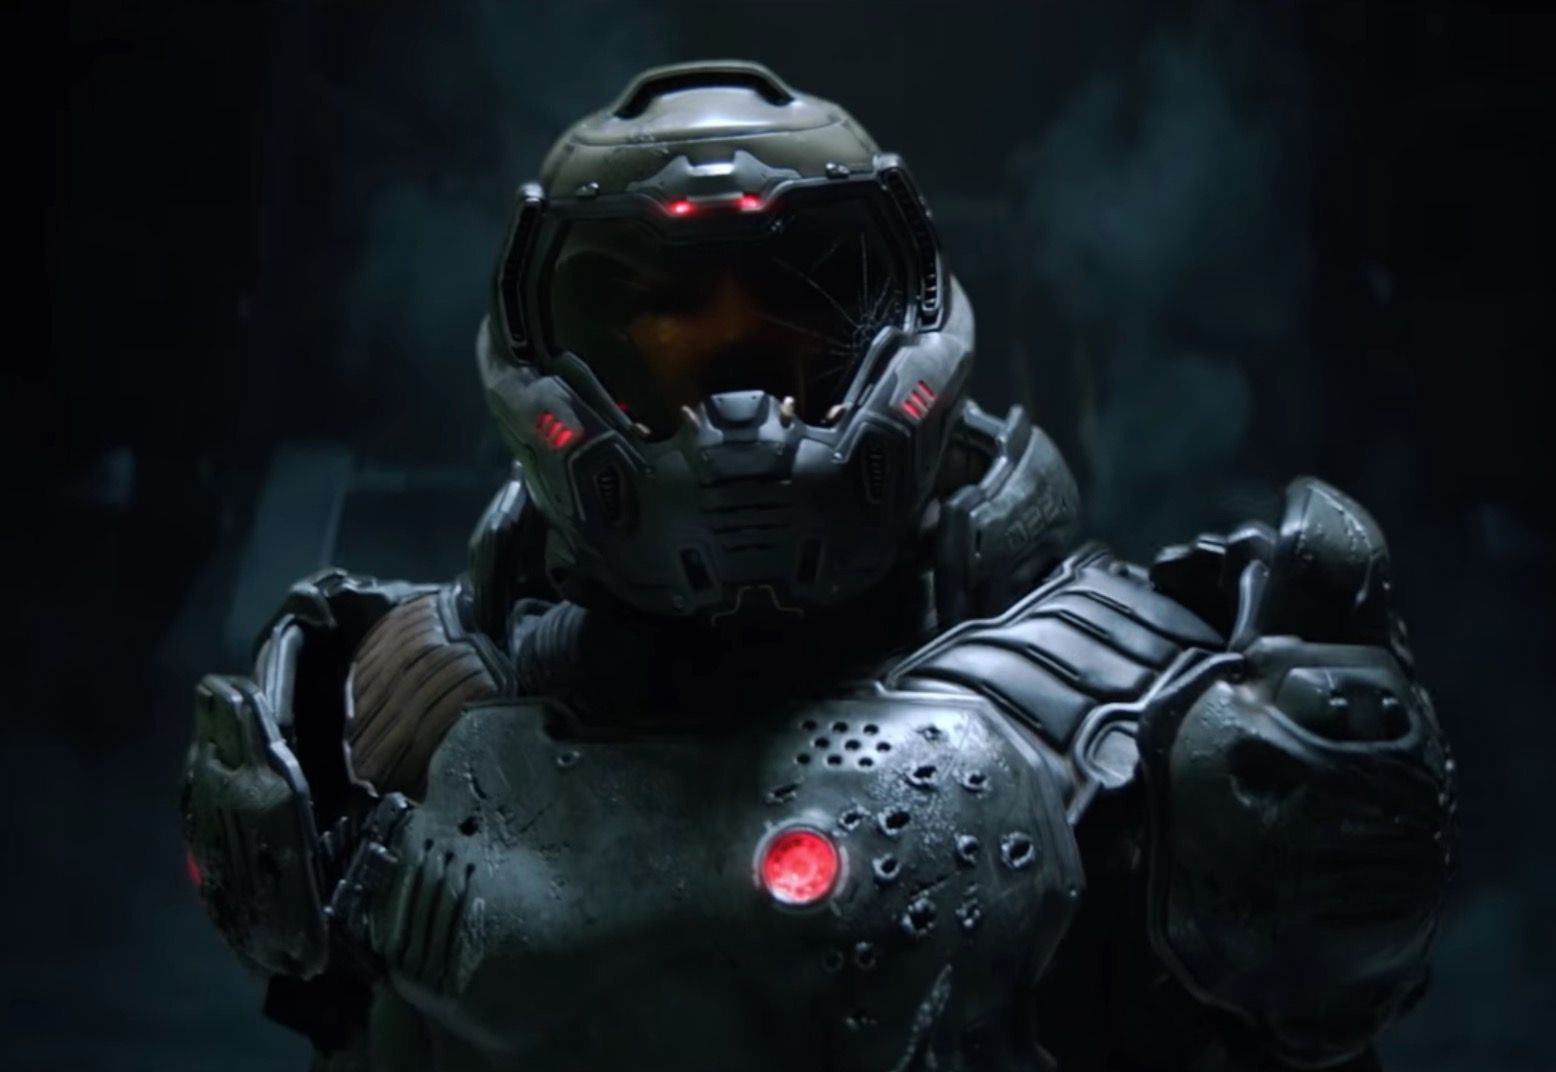 bethesda says anyone can try doom beta on 15 april confirms dlc packs image 1